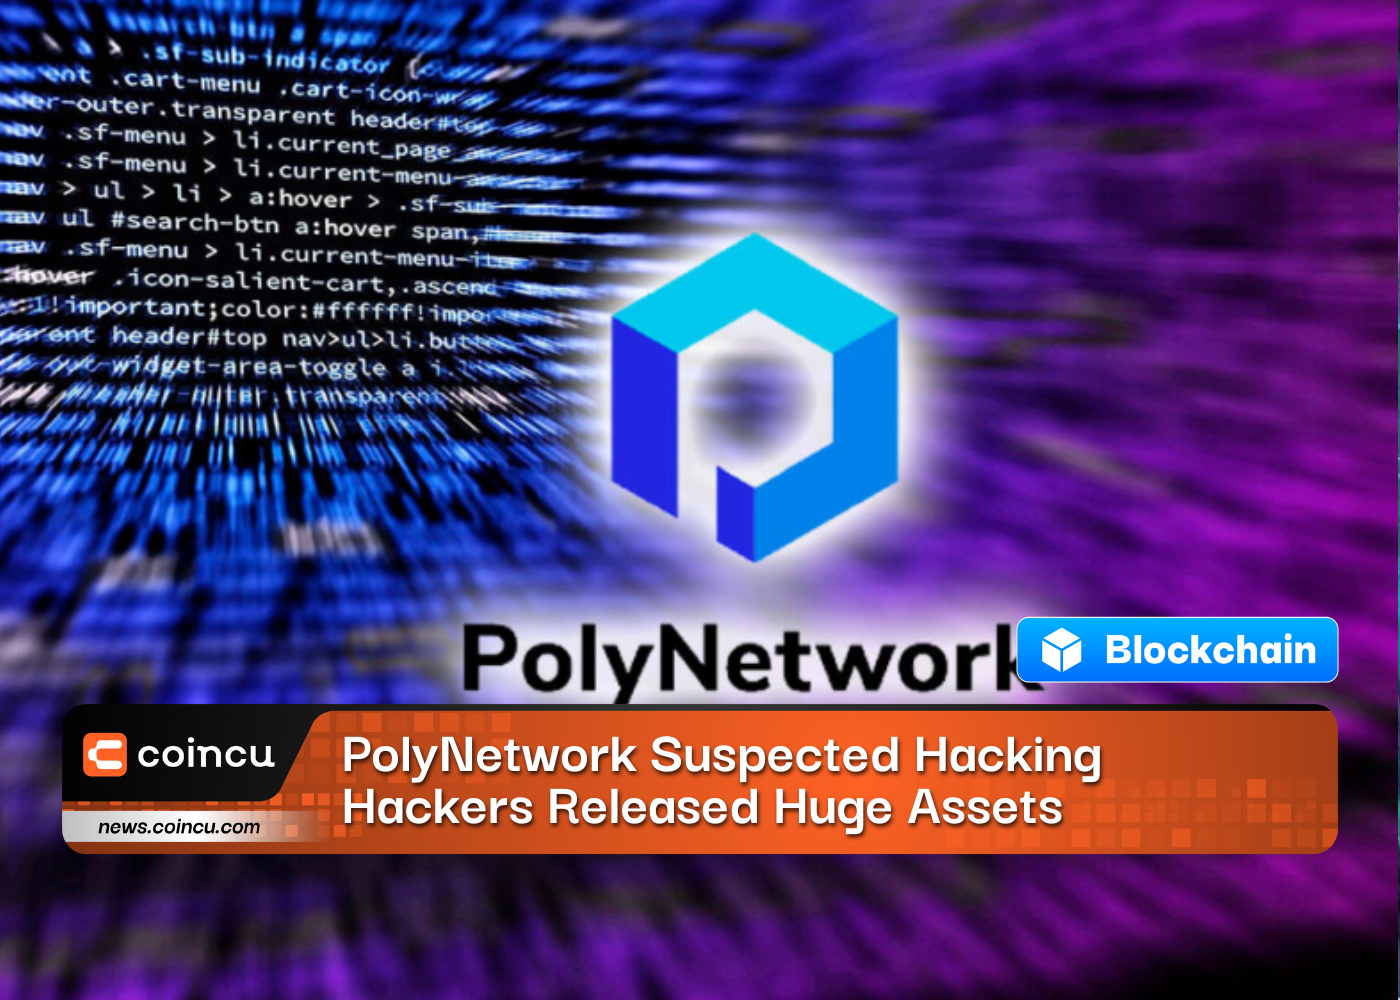 PolyNetwork Suspected Hacking, Hackers Released Huge Assets